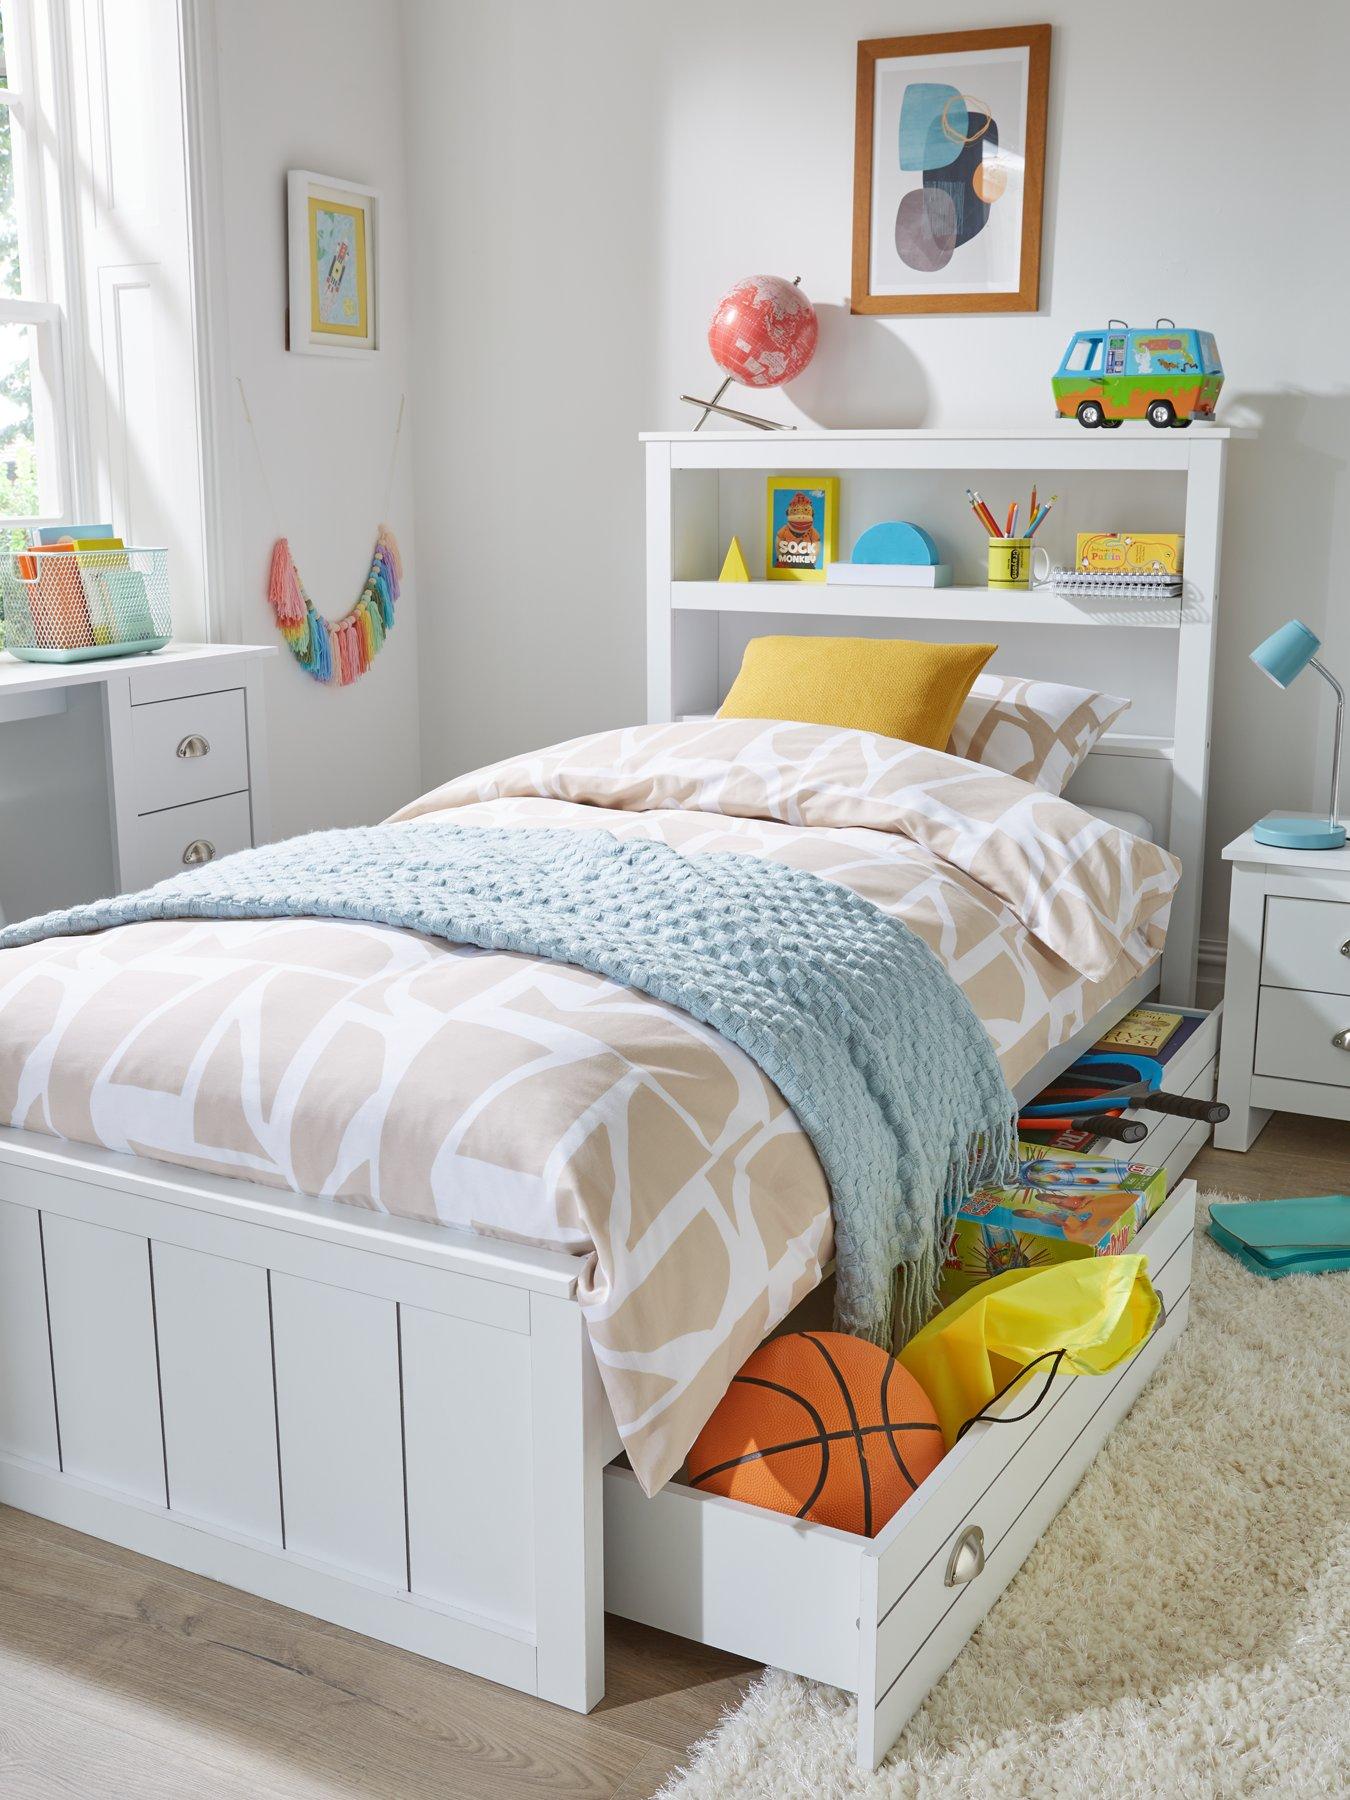 Very Home Atlanta Children'S Single Bed With Drawers, Storage Headboard And Mattress Options (Buy And Save!) - White - Bed Frame Only